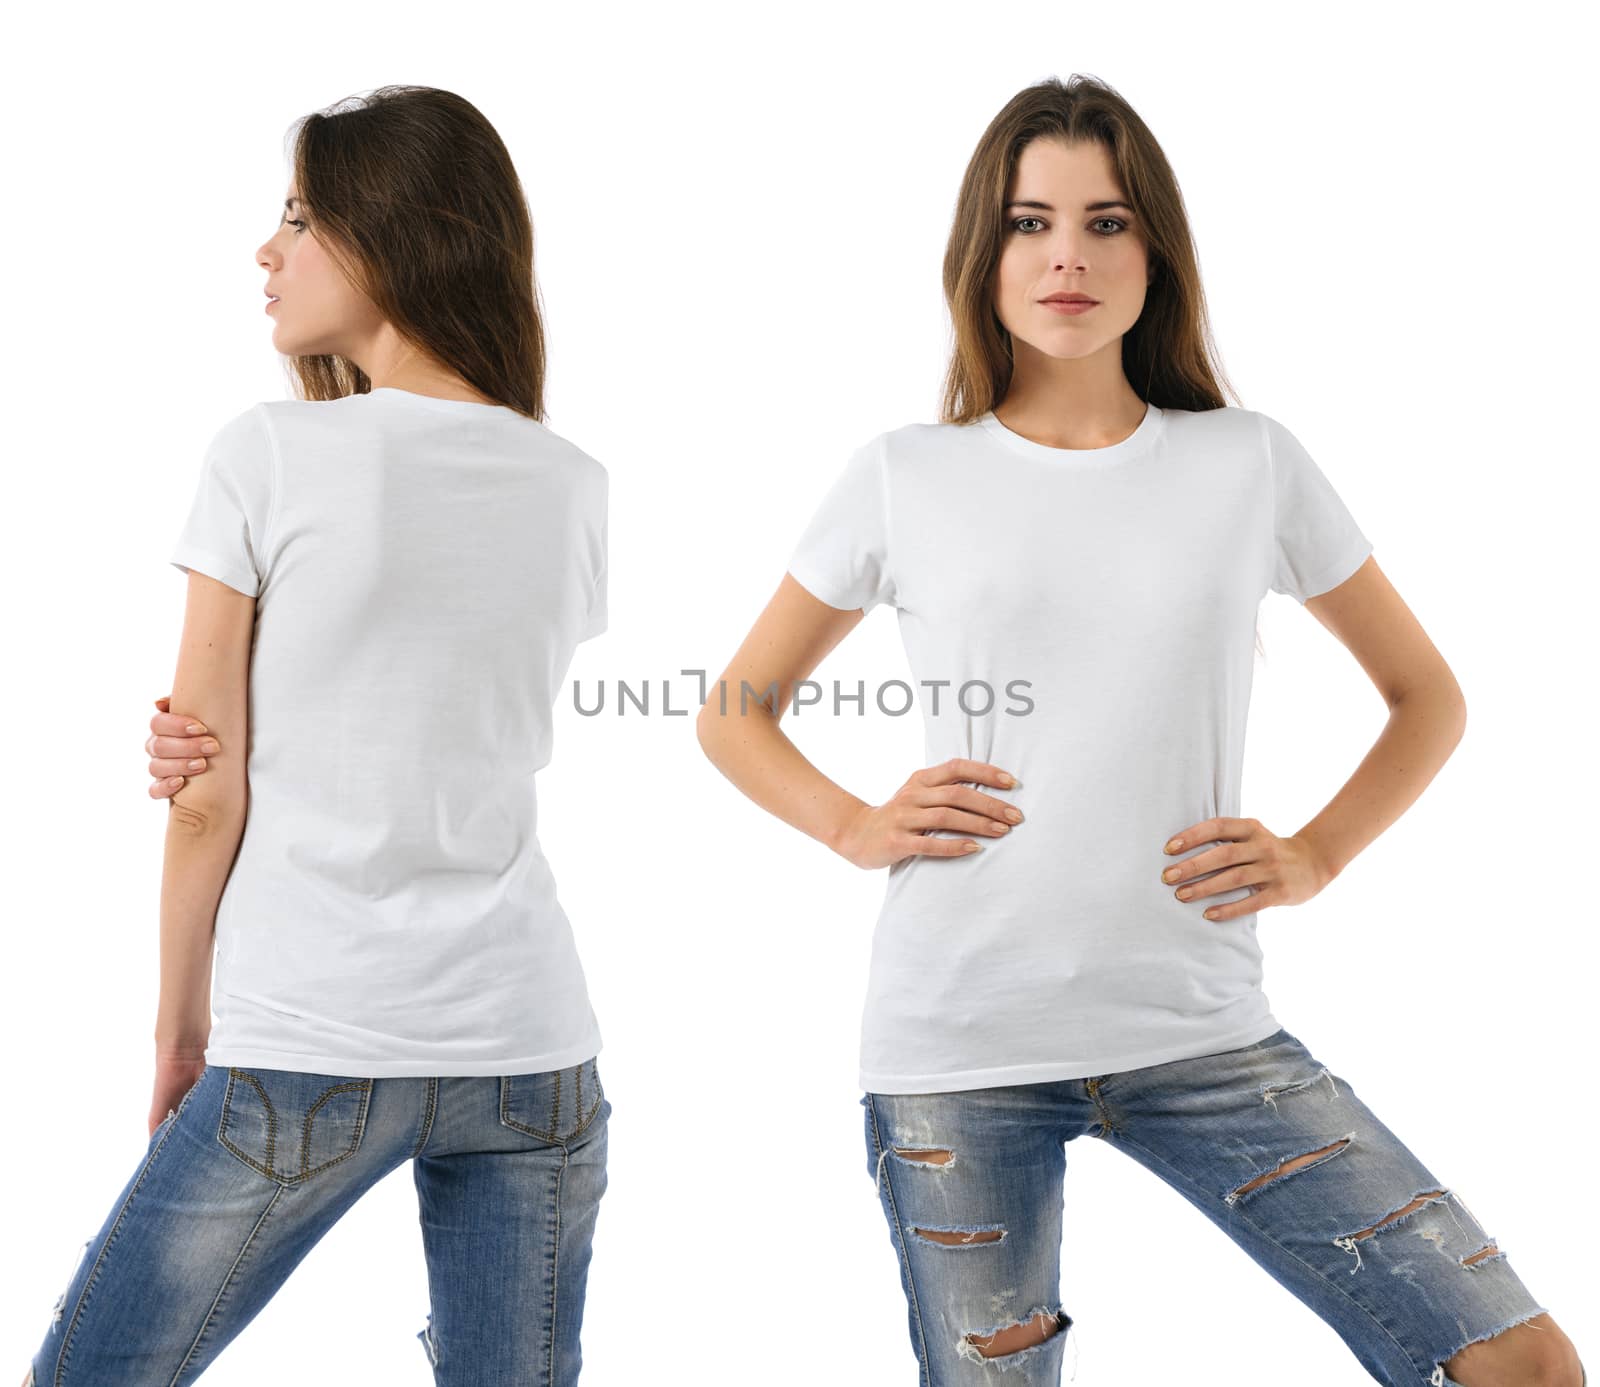 Sexy woman with blank white shirt and jeans by sumners